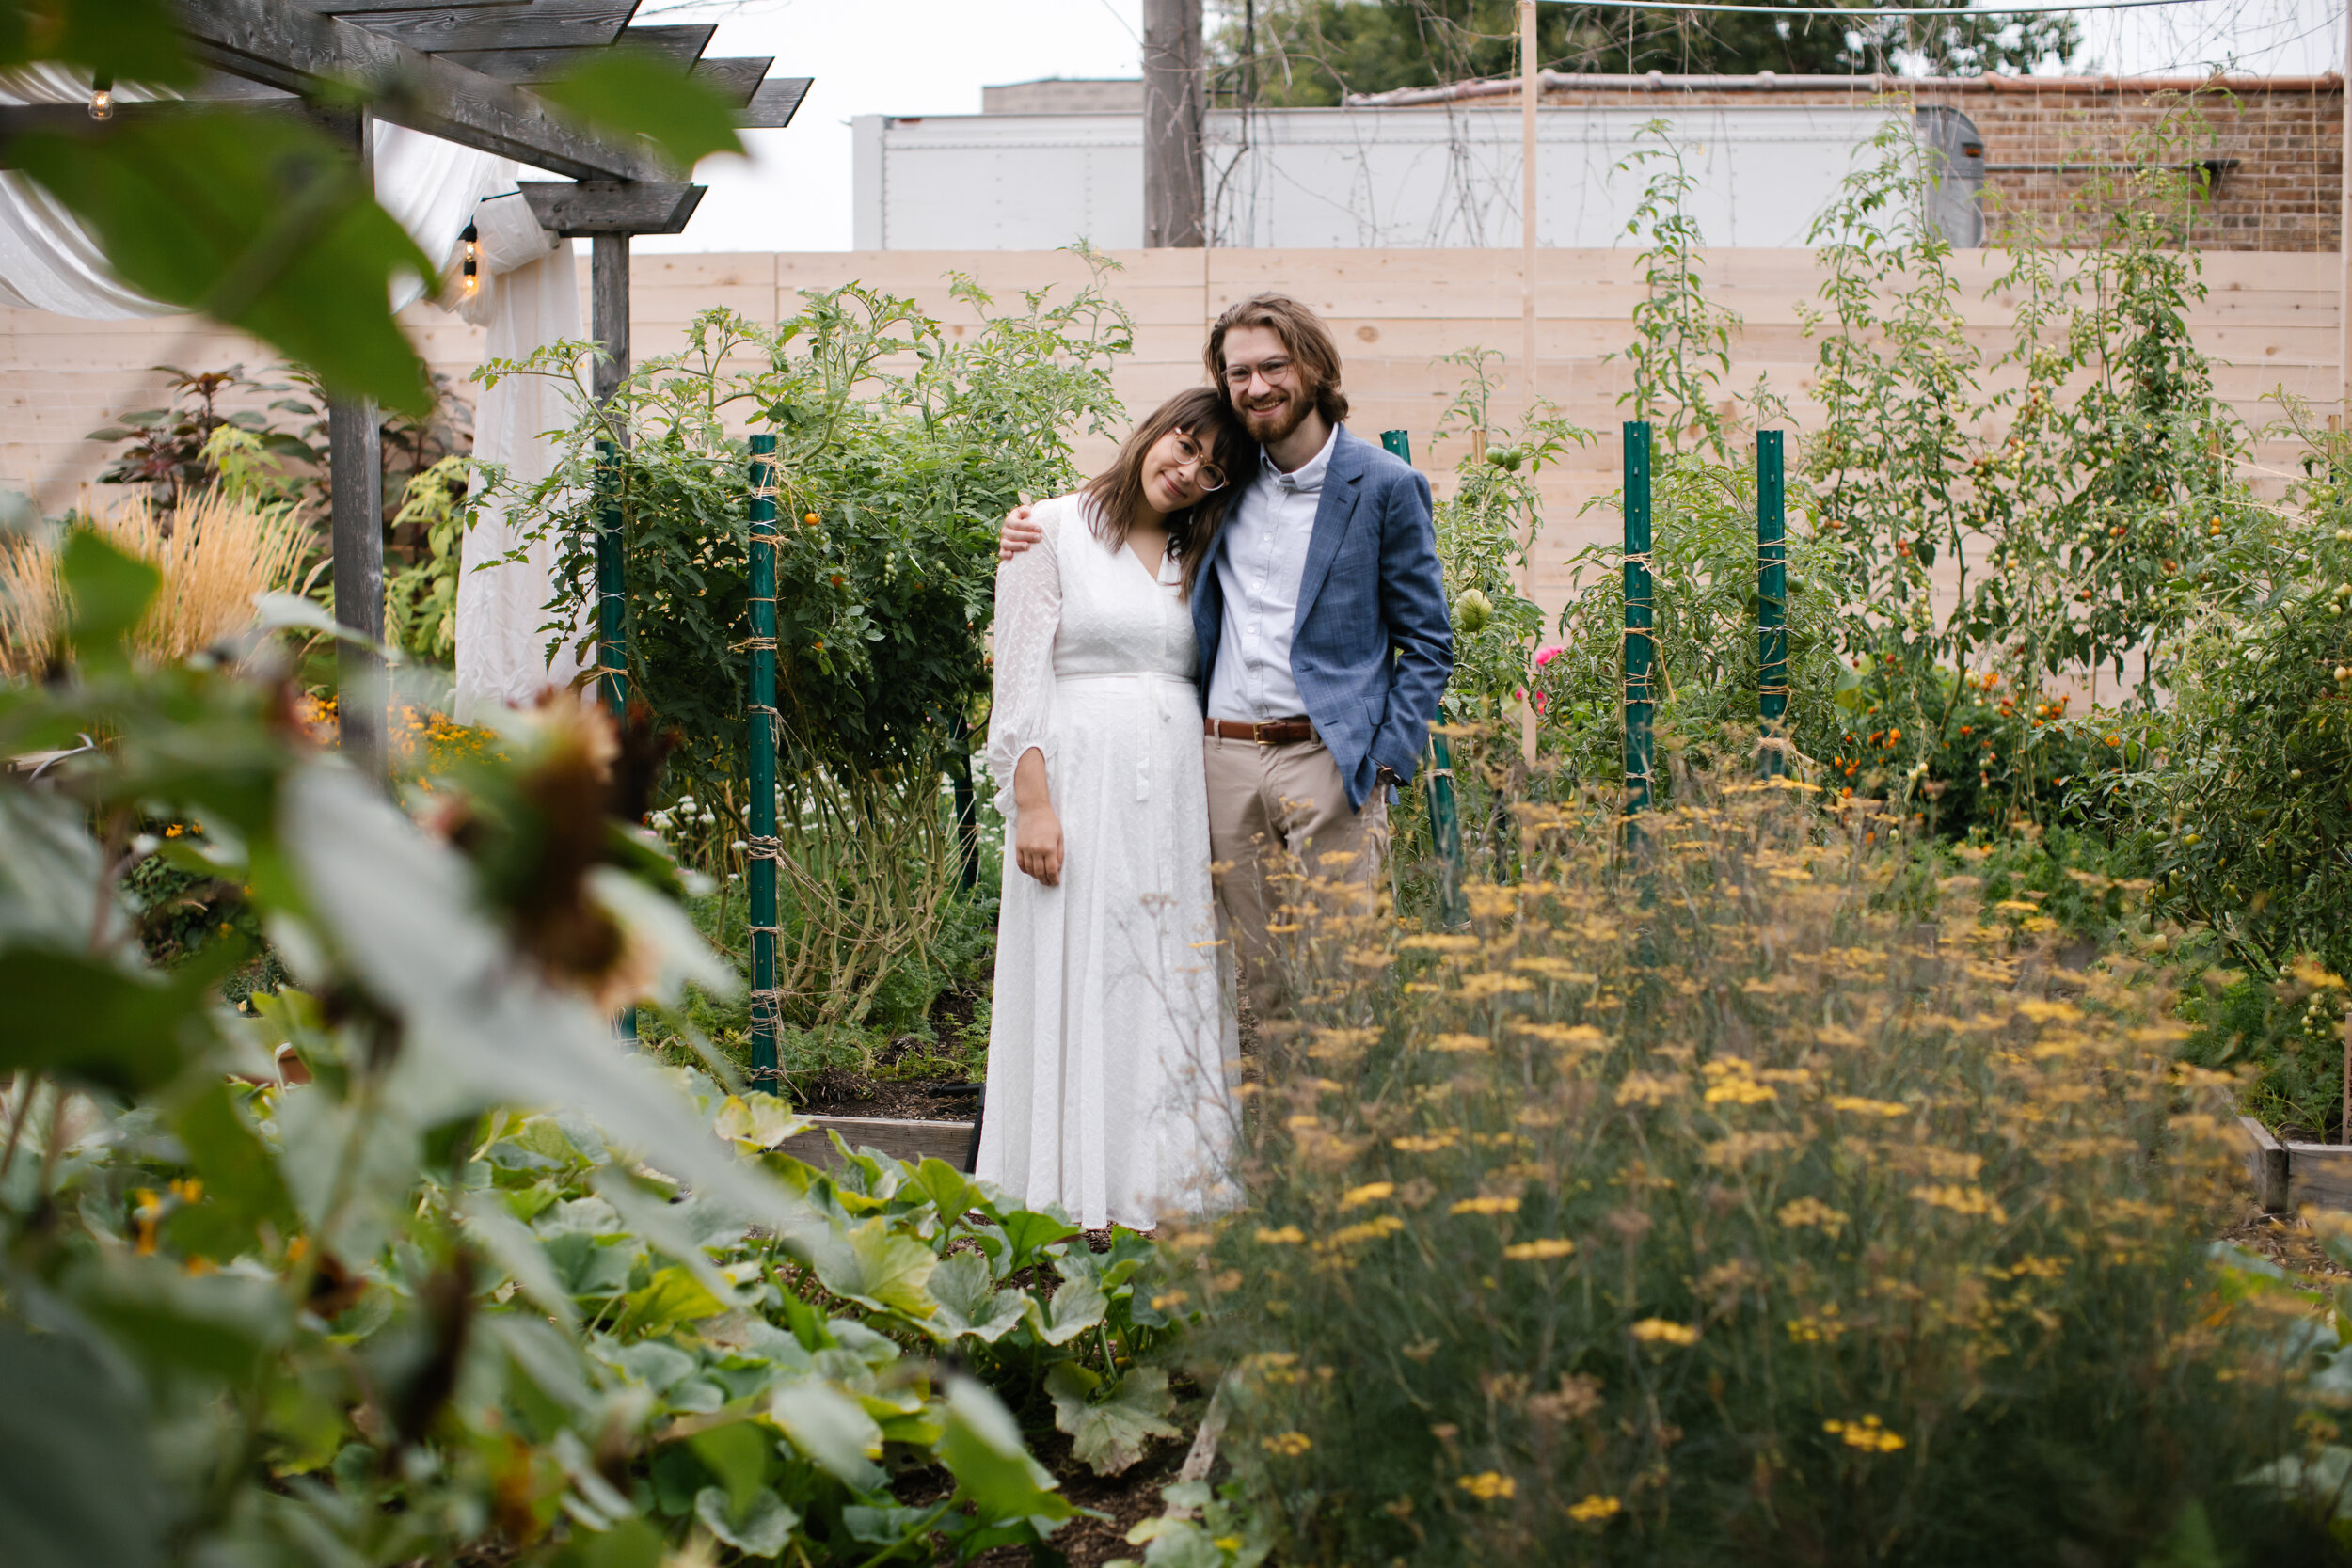 Intimate Summer Wedding and Brunch at Big Delicious Planet's Urban Farm featured on CHI thee WED